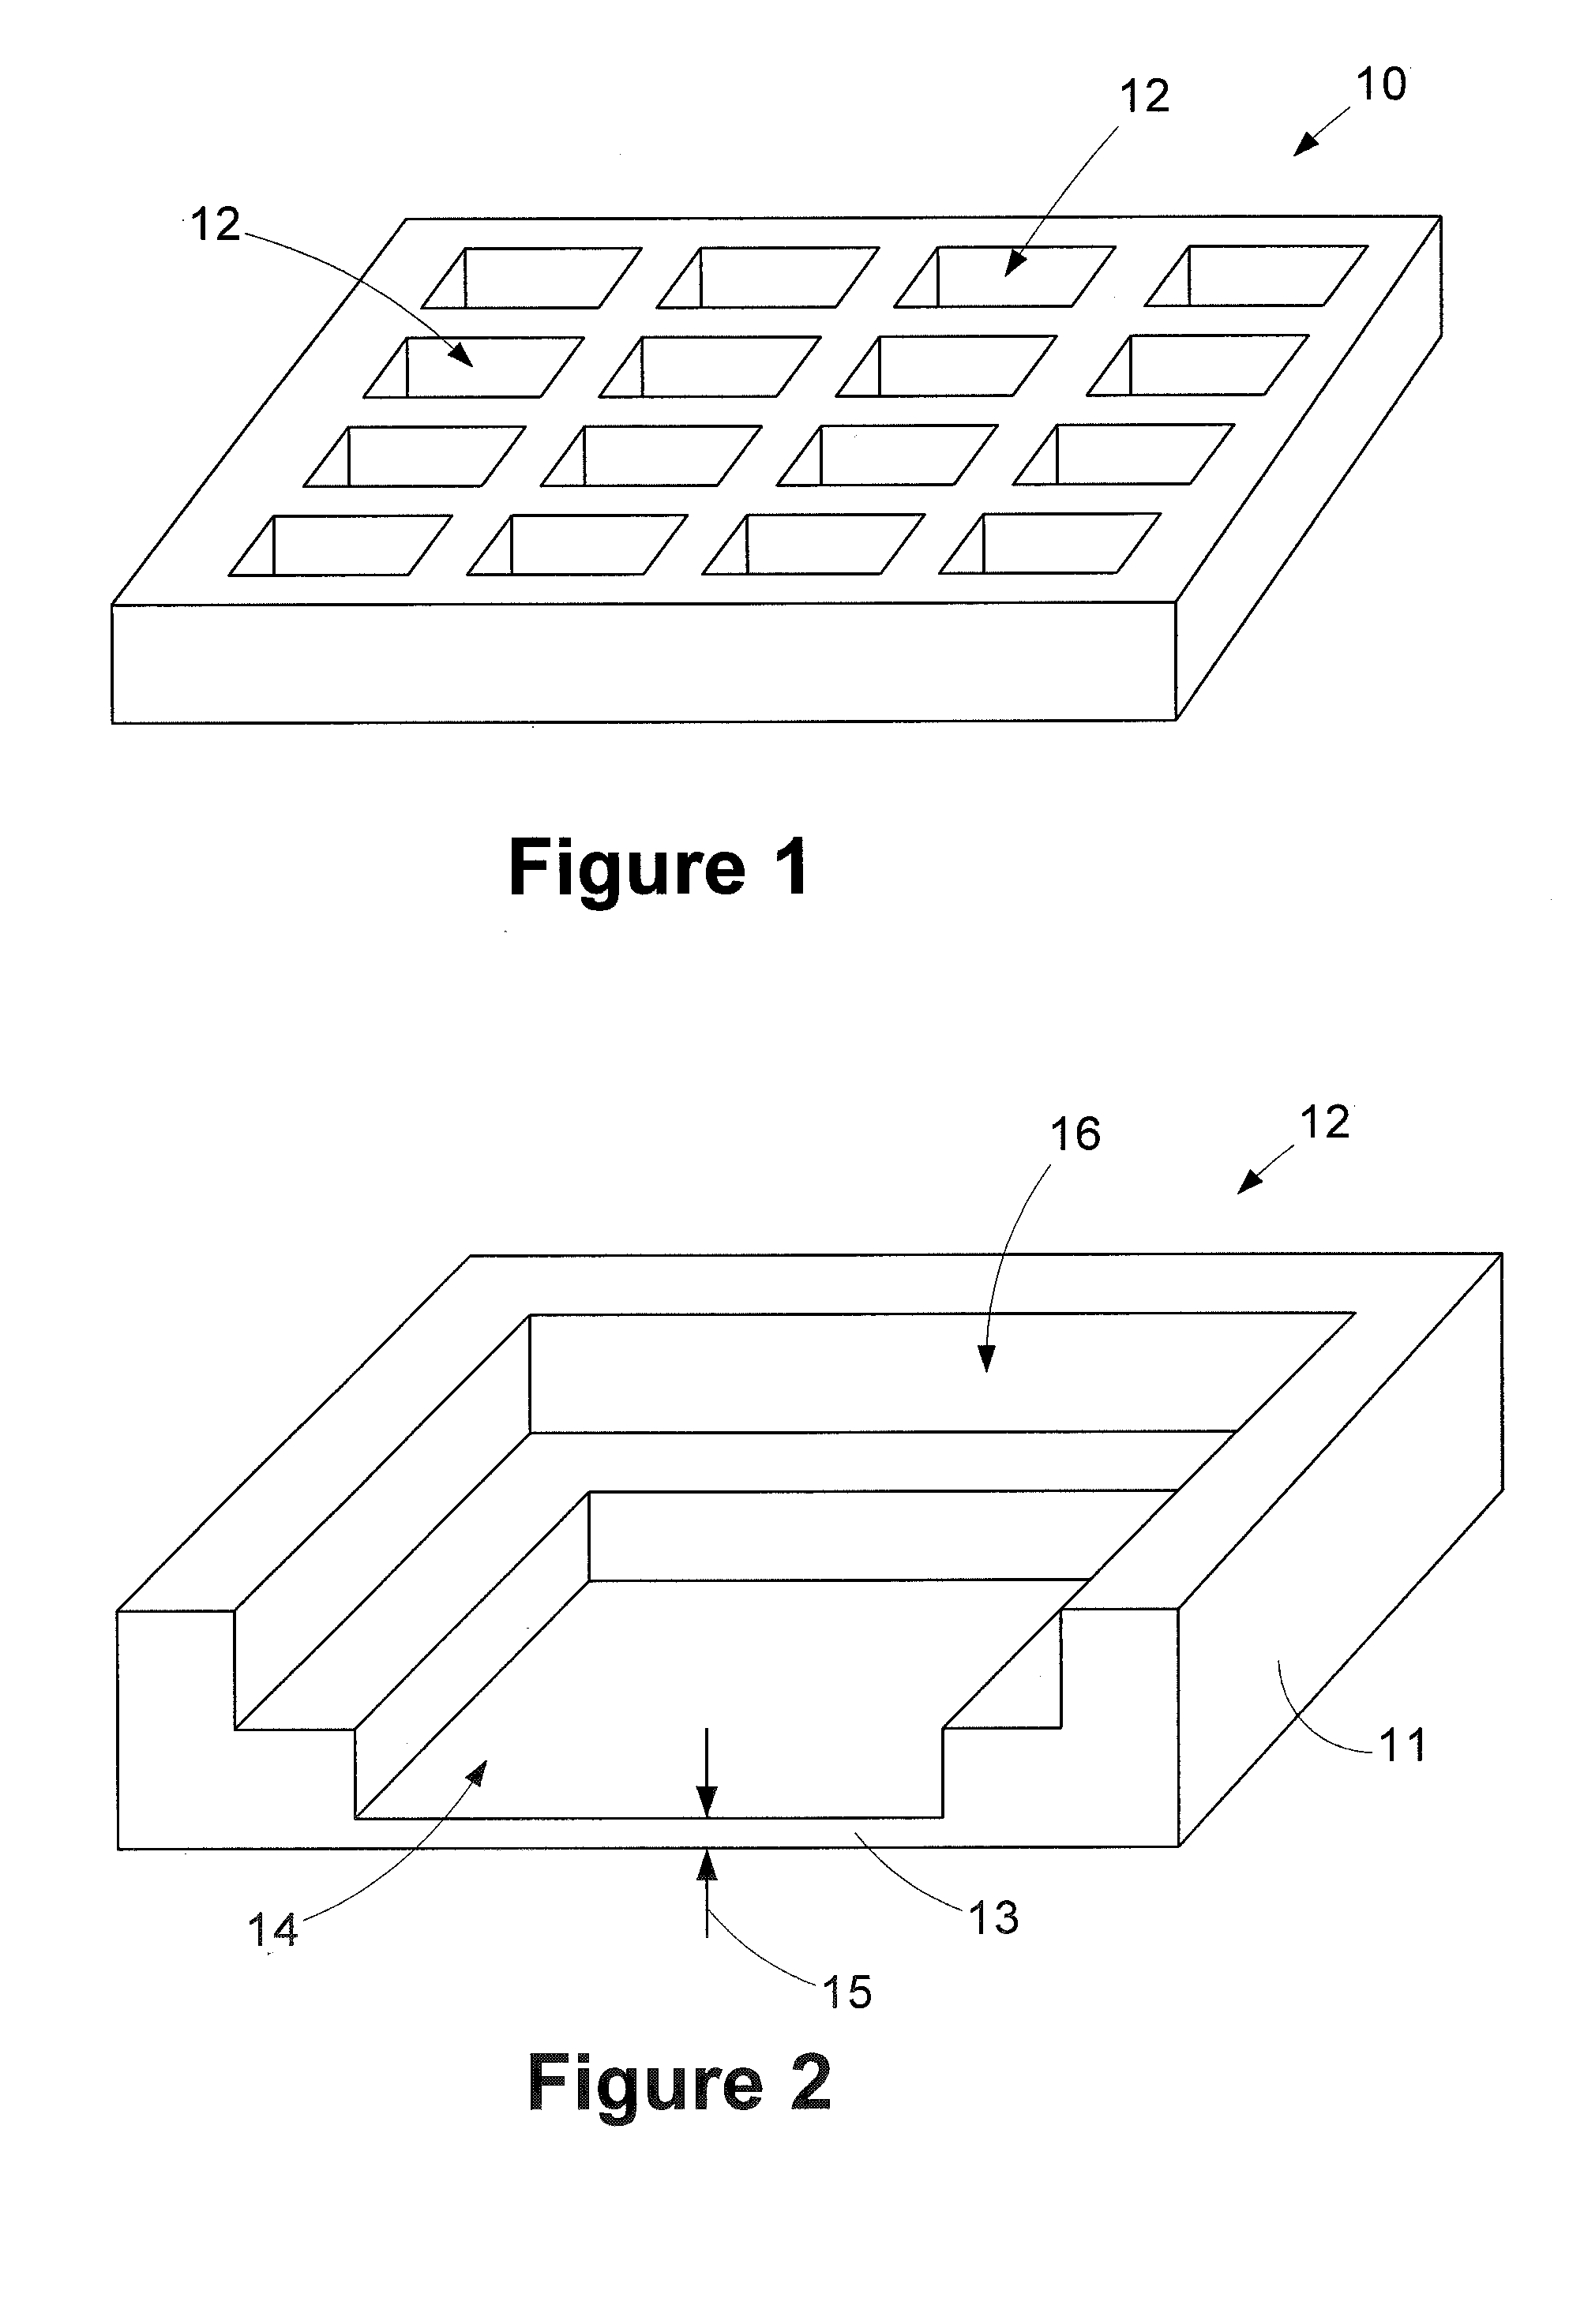 Method of Packaging Integrated Circuit Devices Using Preformed Carrier